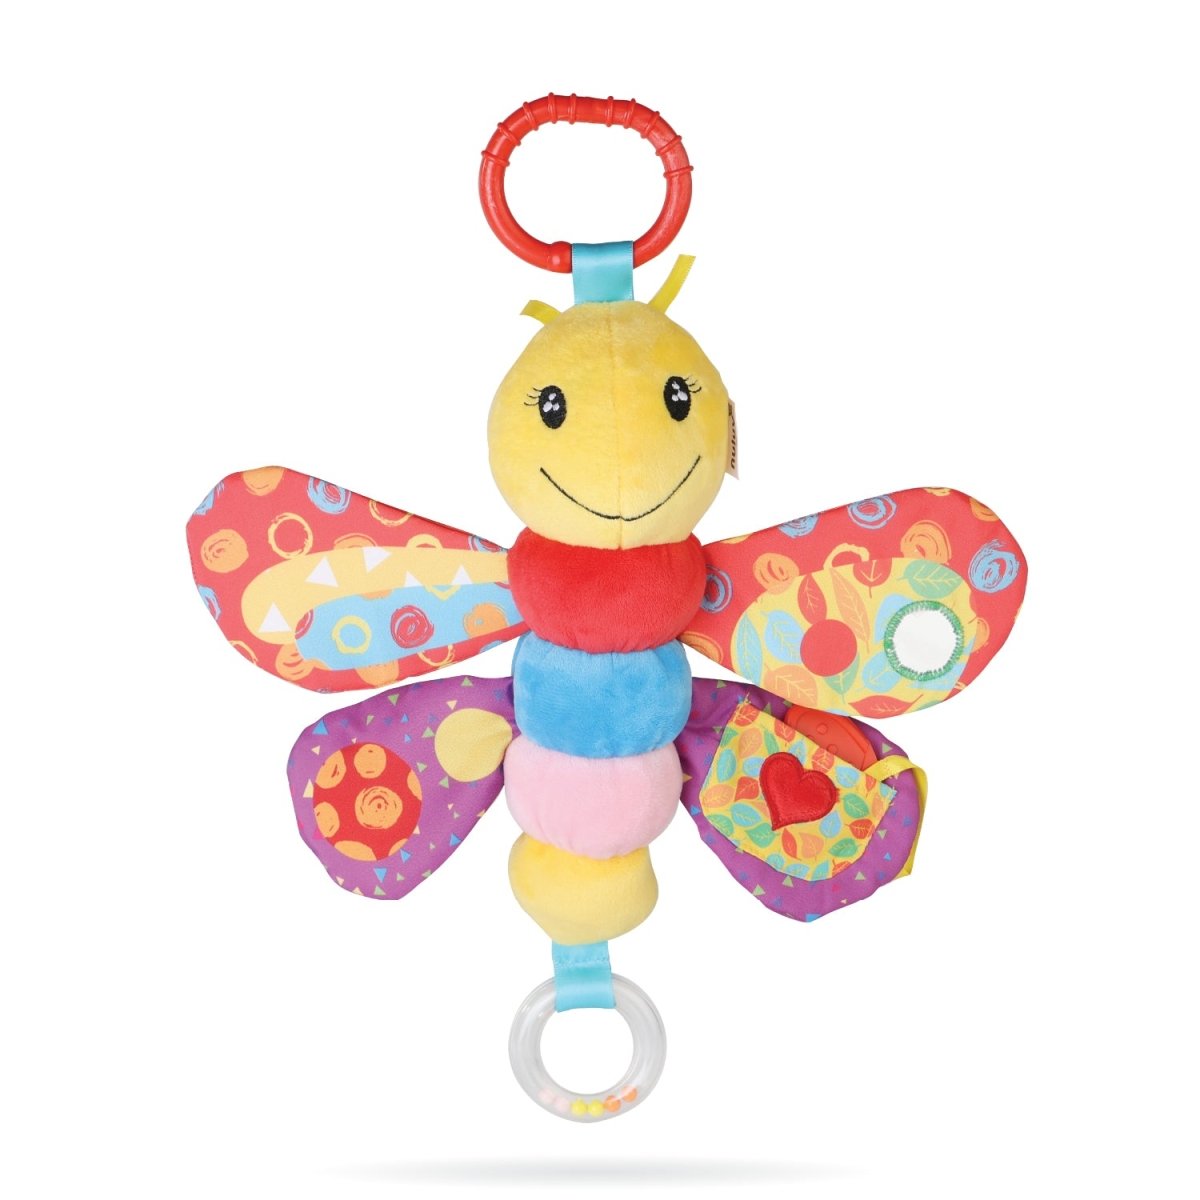 Nuluv Butterfly- Soft toy crinkle and teether - NU-I-0009